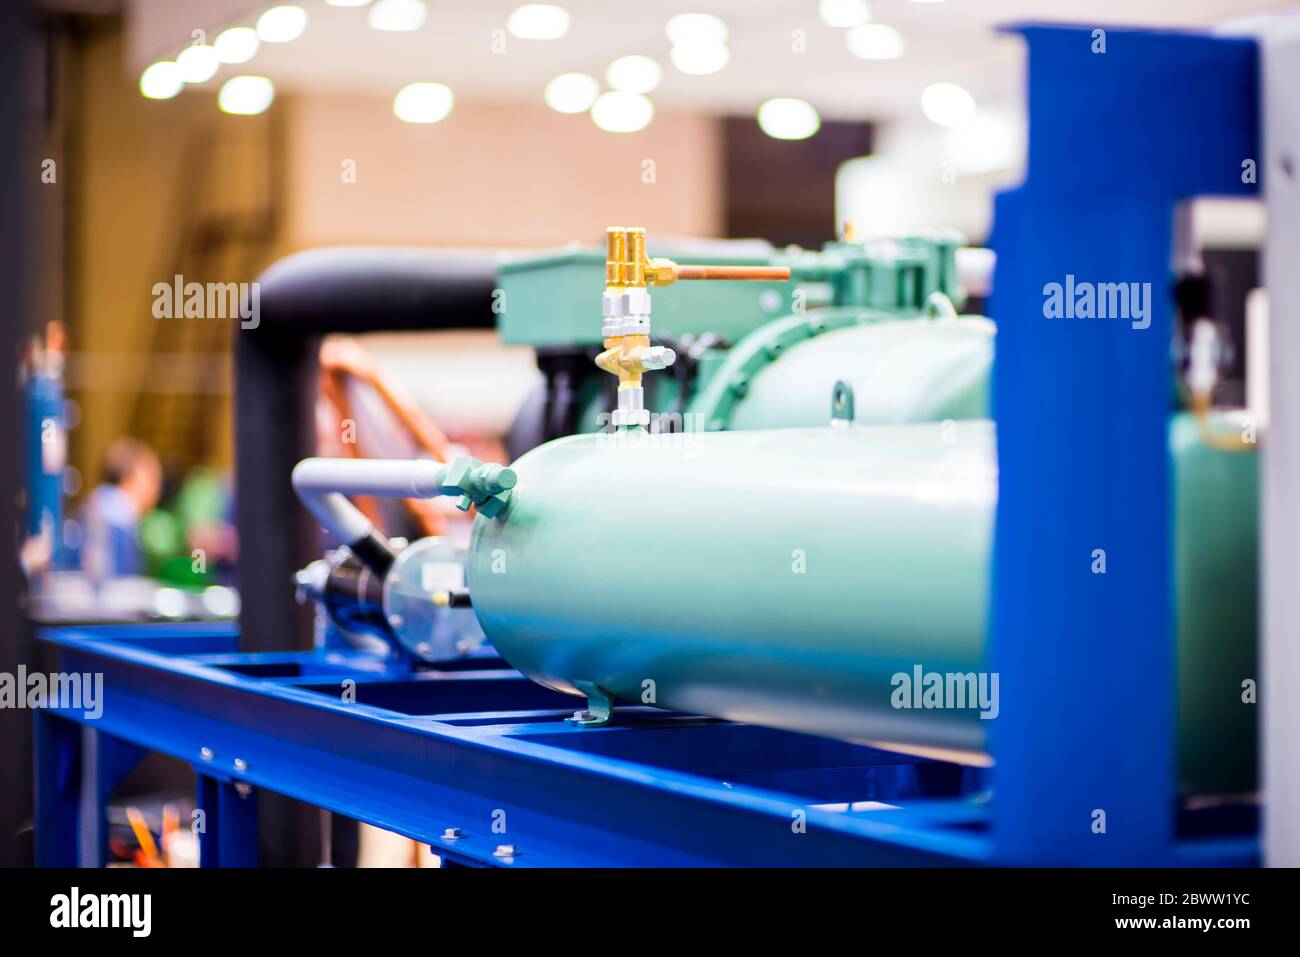 Industrial stainless steel piping connected by special nuts. Cooling system element for the food industry. Stock Photo